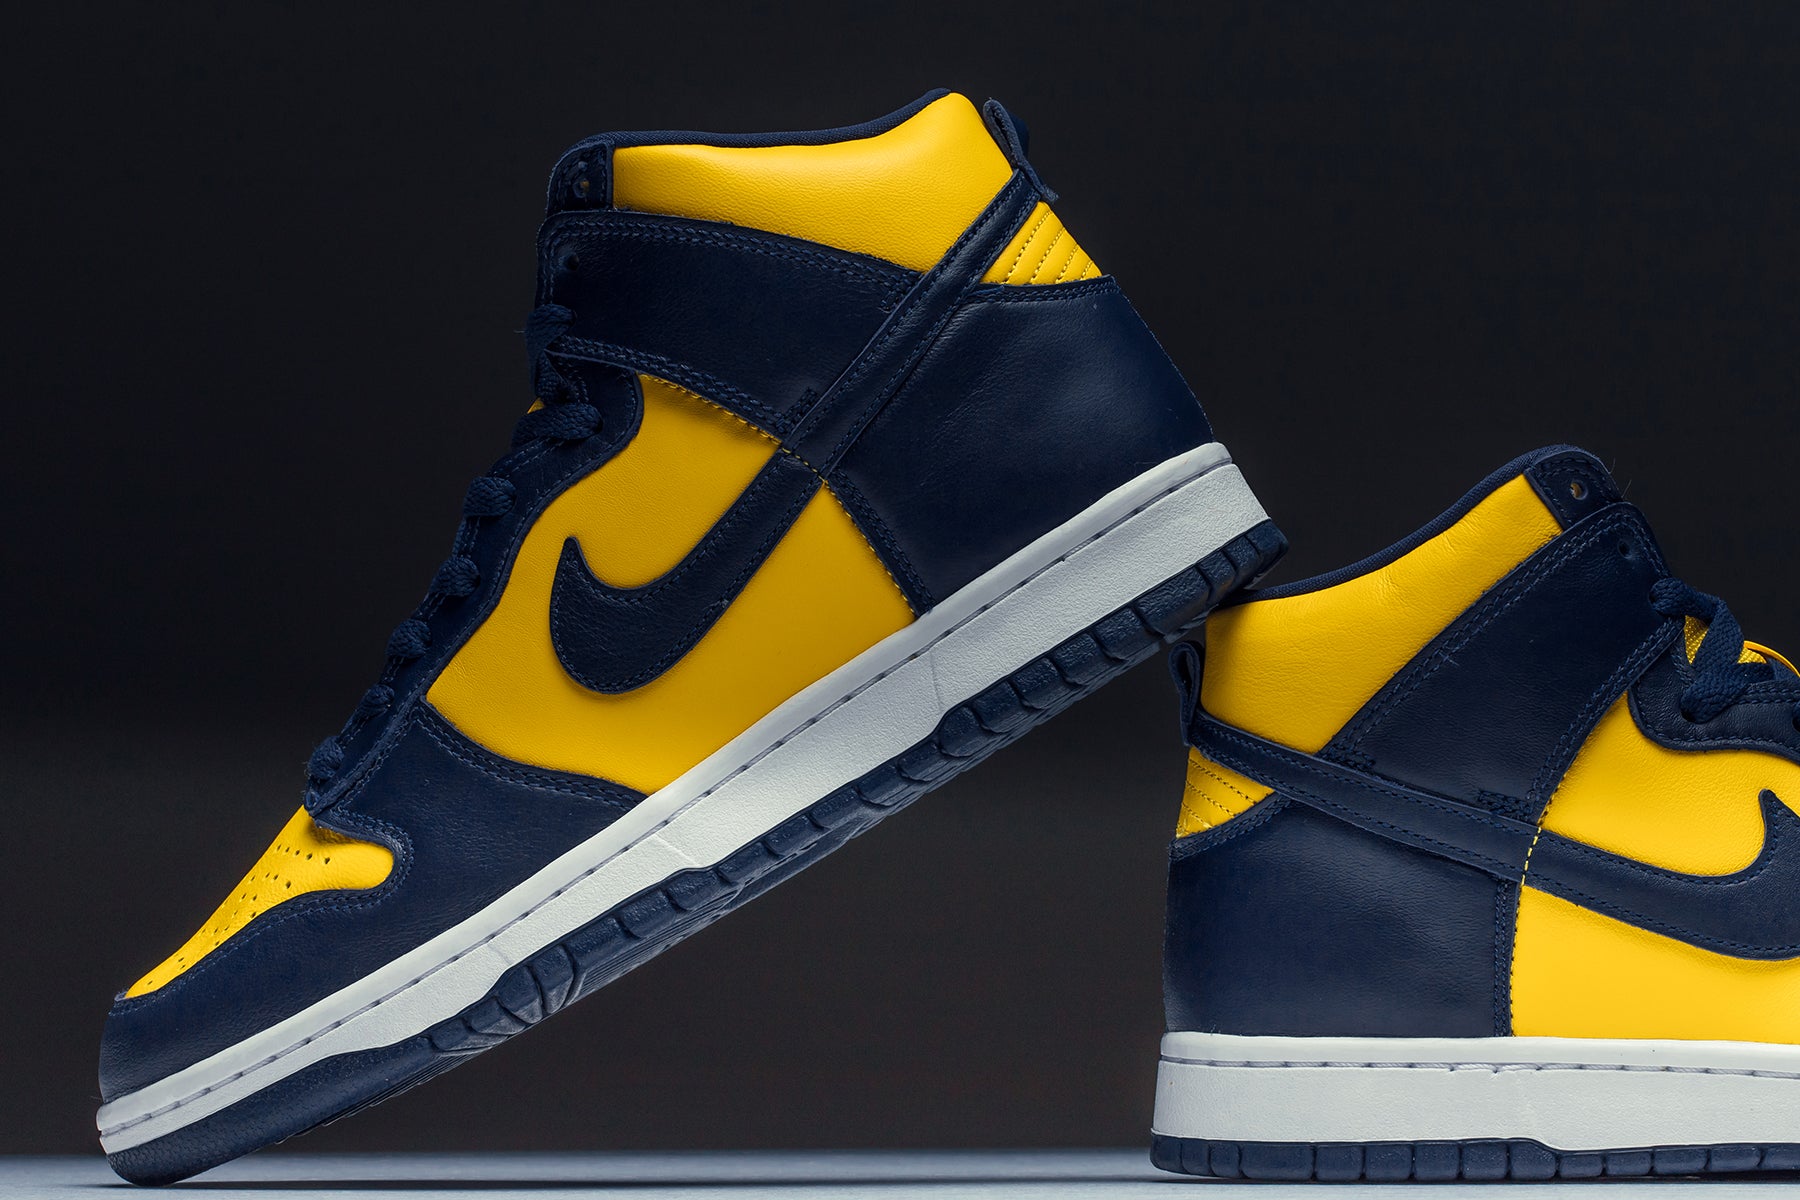 NIKE ダンクHIGH  Maize and Blue